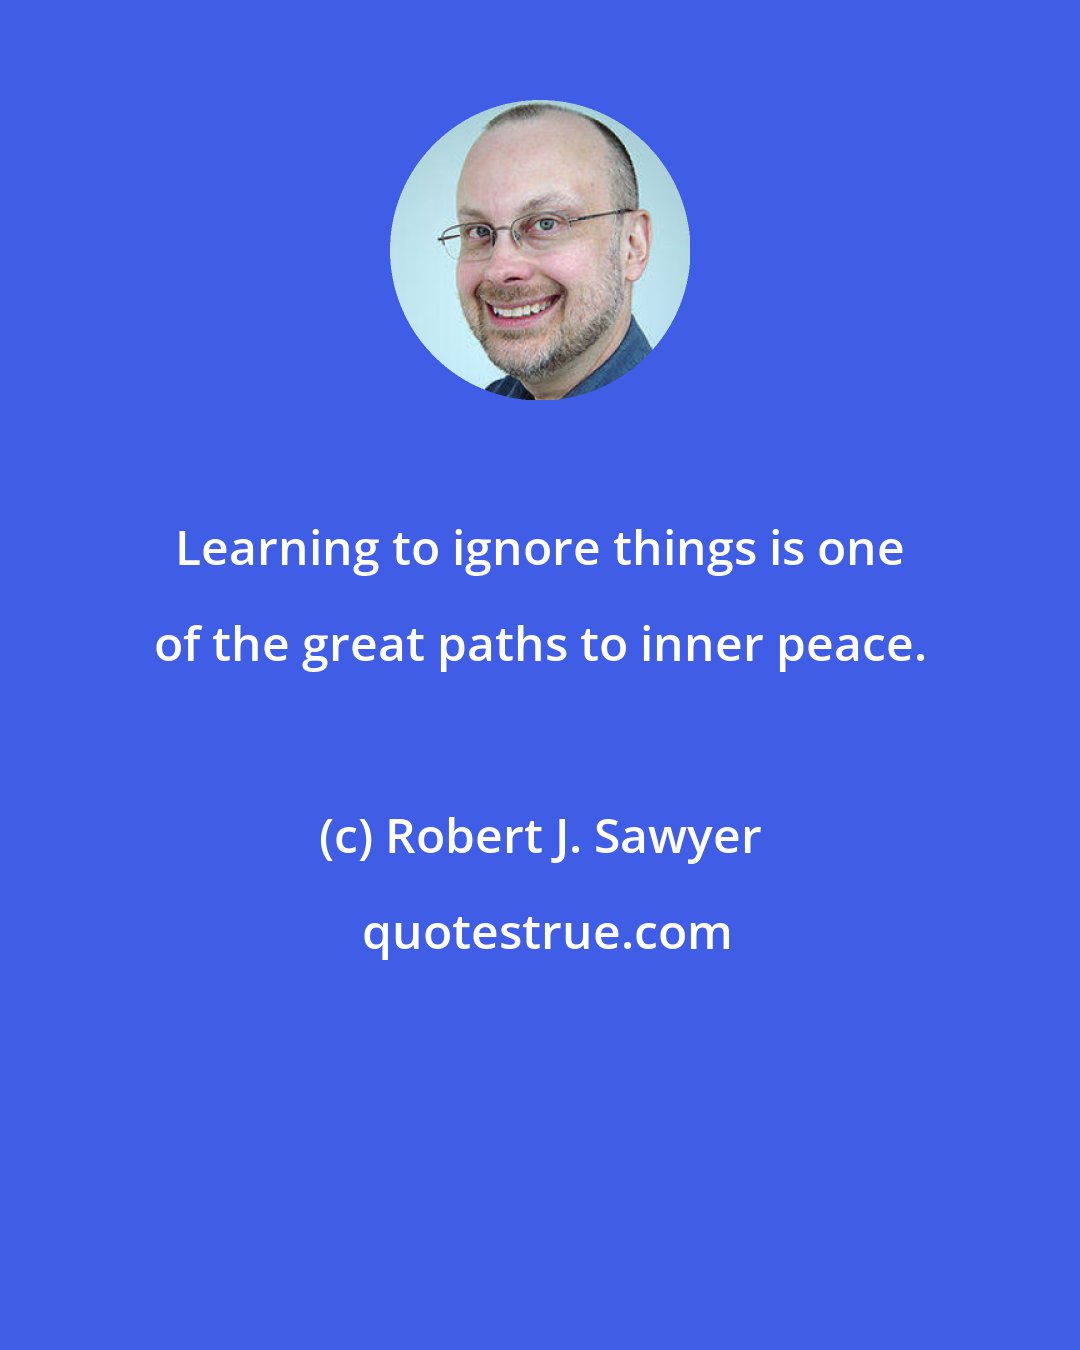 Robert J. Sawyer: Learning to ignore things is one of the great paths to inner peace.